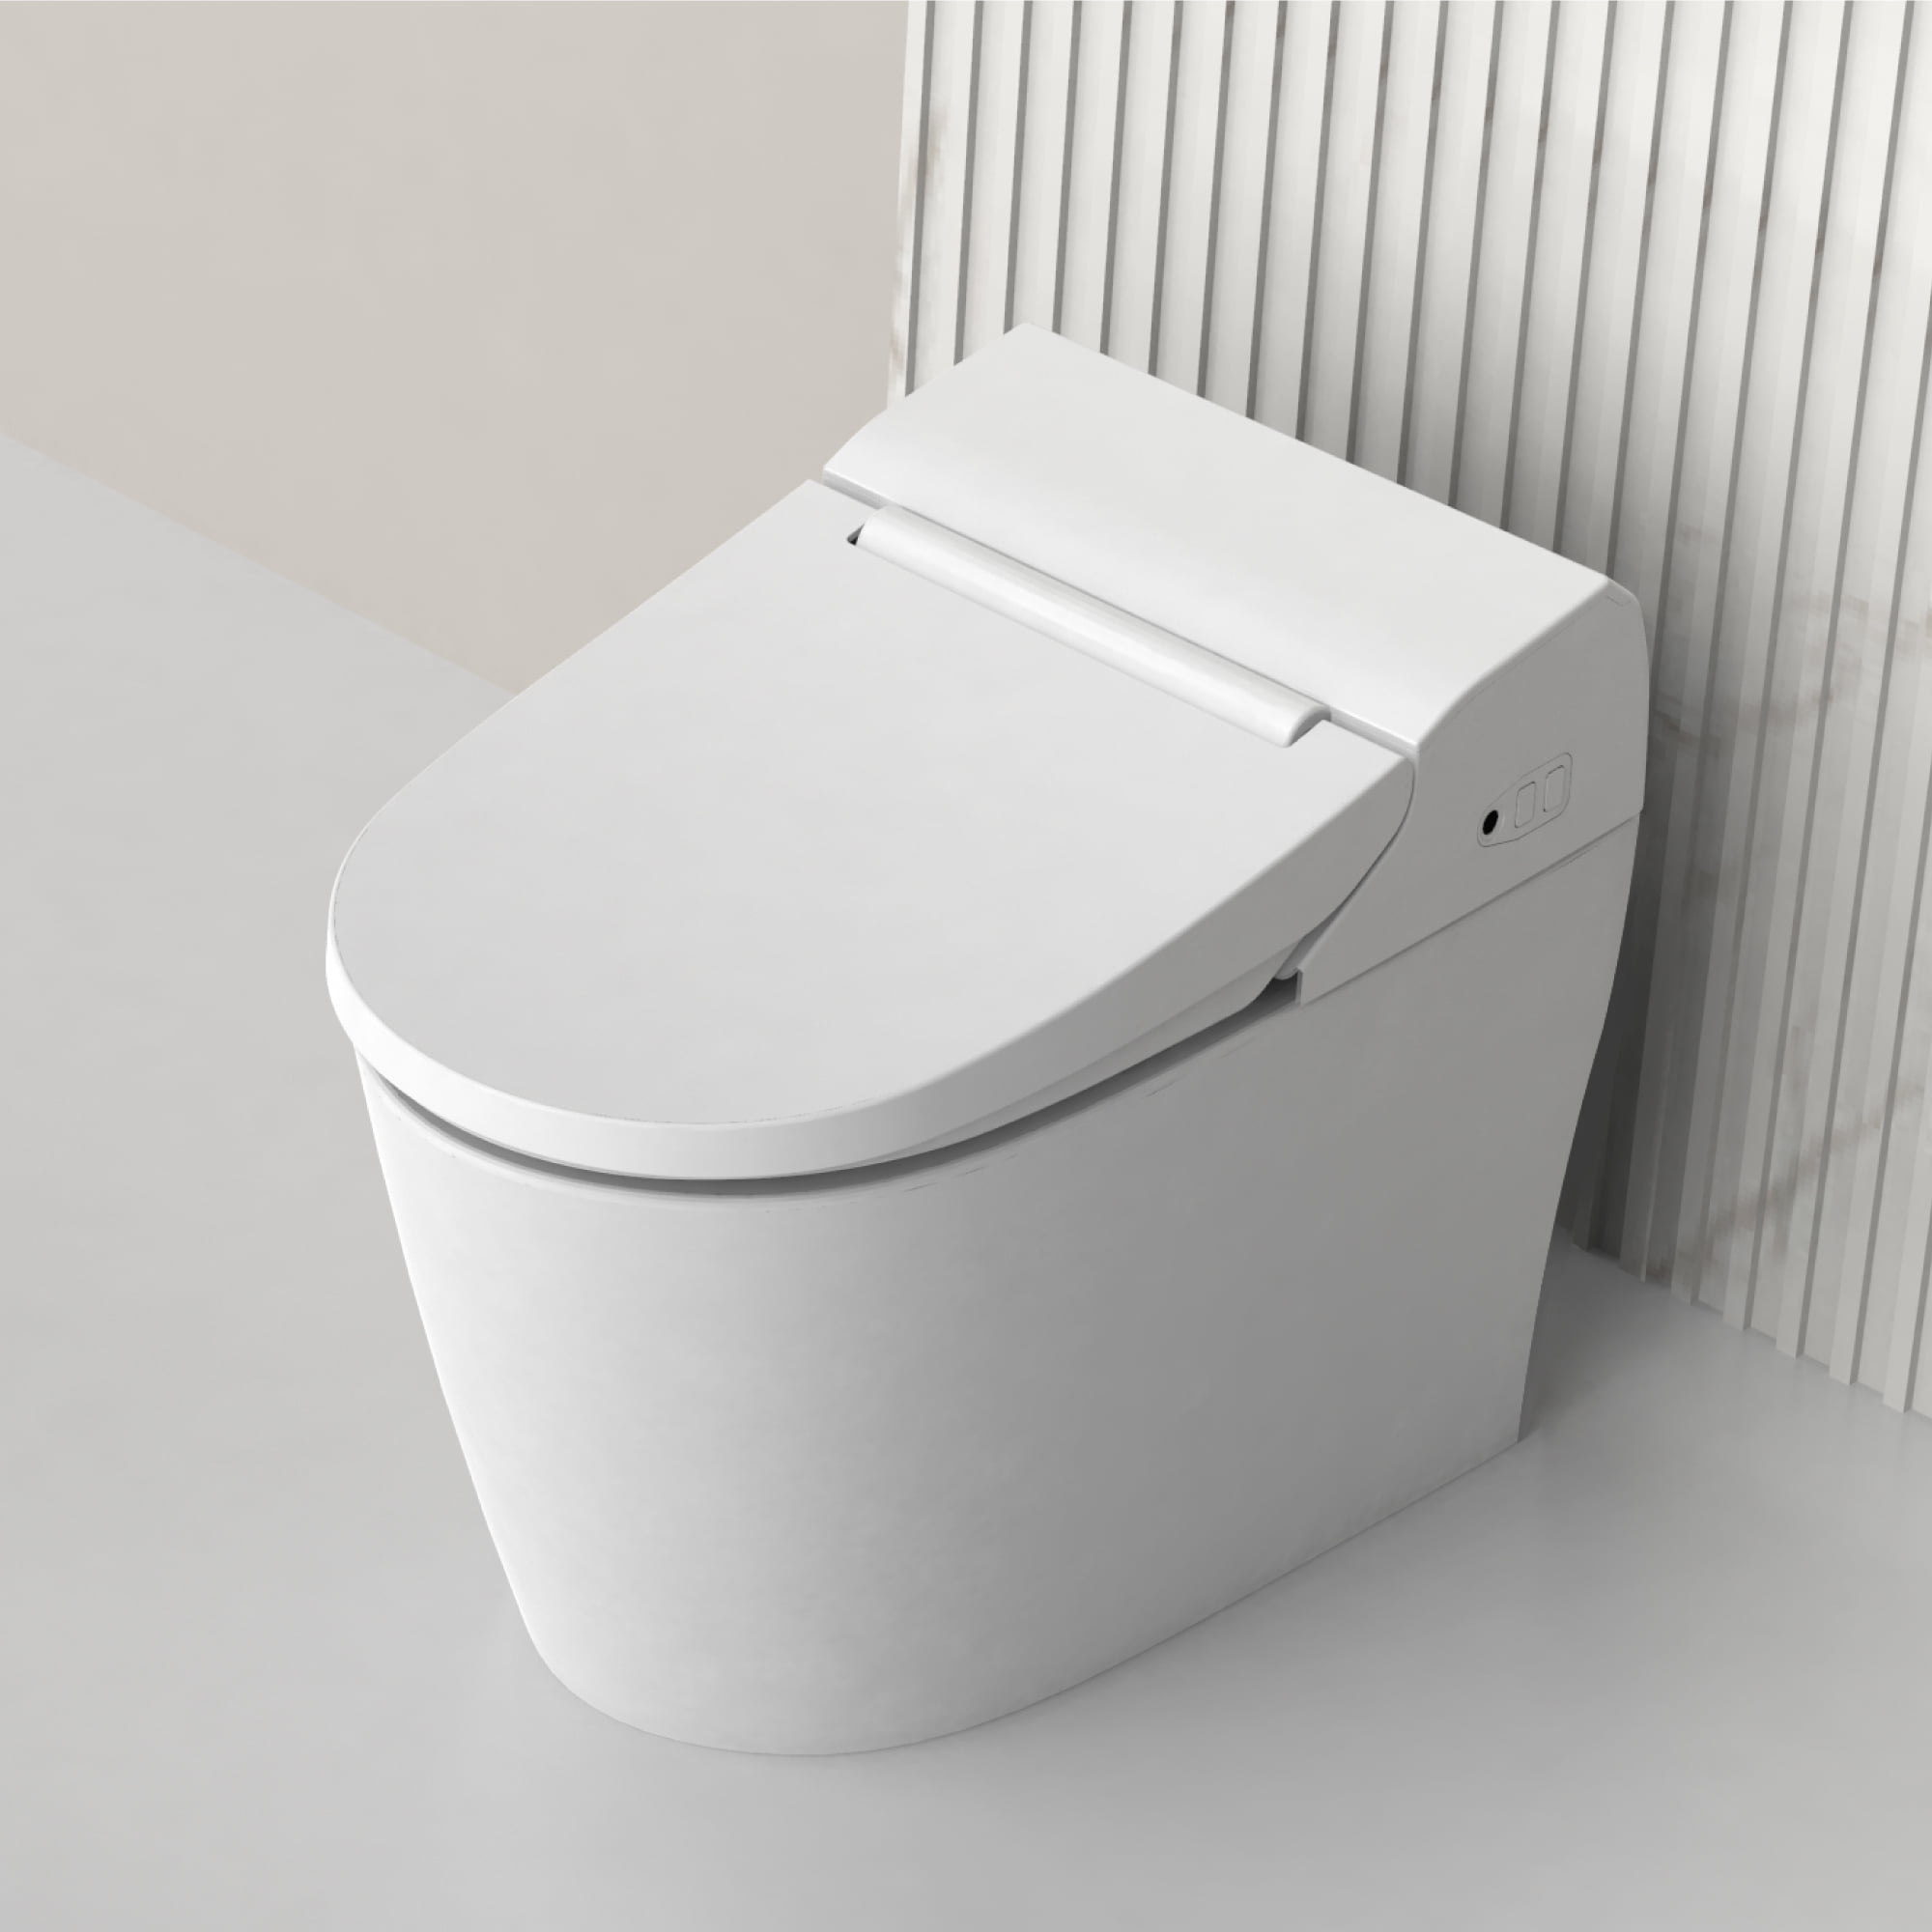 Vovo Stylement Tcb 8100w Smart Toilet Bidet Toilet One Piece Toilet With Auto Dual Flush Uv Led Sterilization Heated Seat Warm Water And Dry Made In Korea Walmart Com